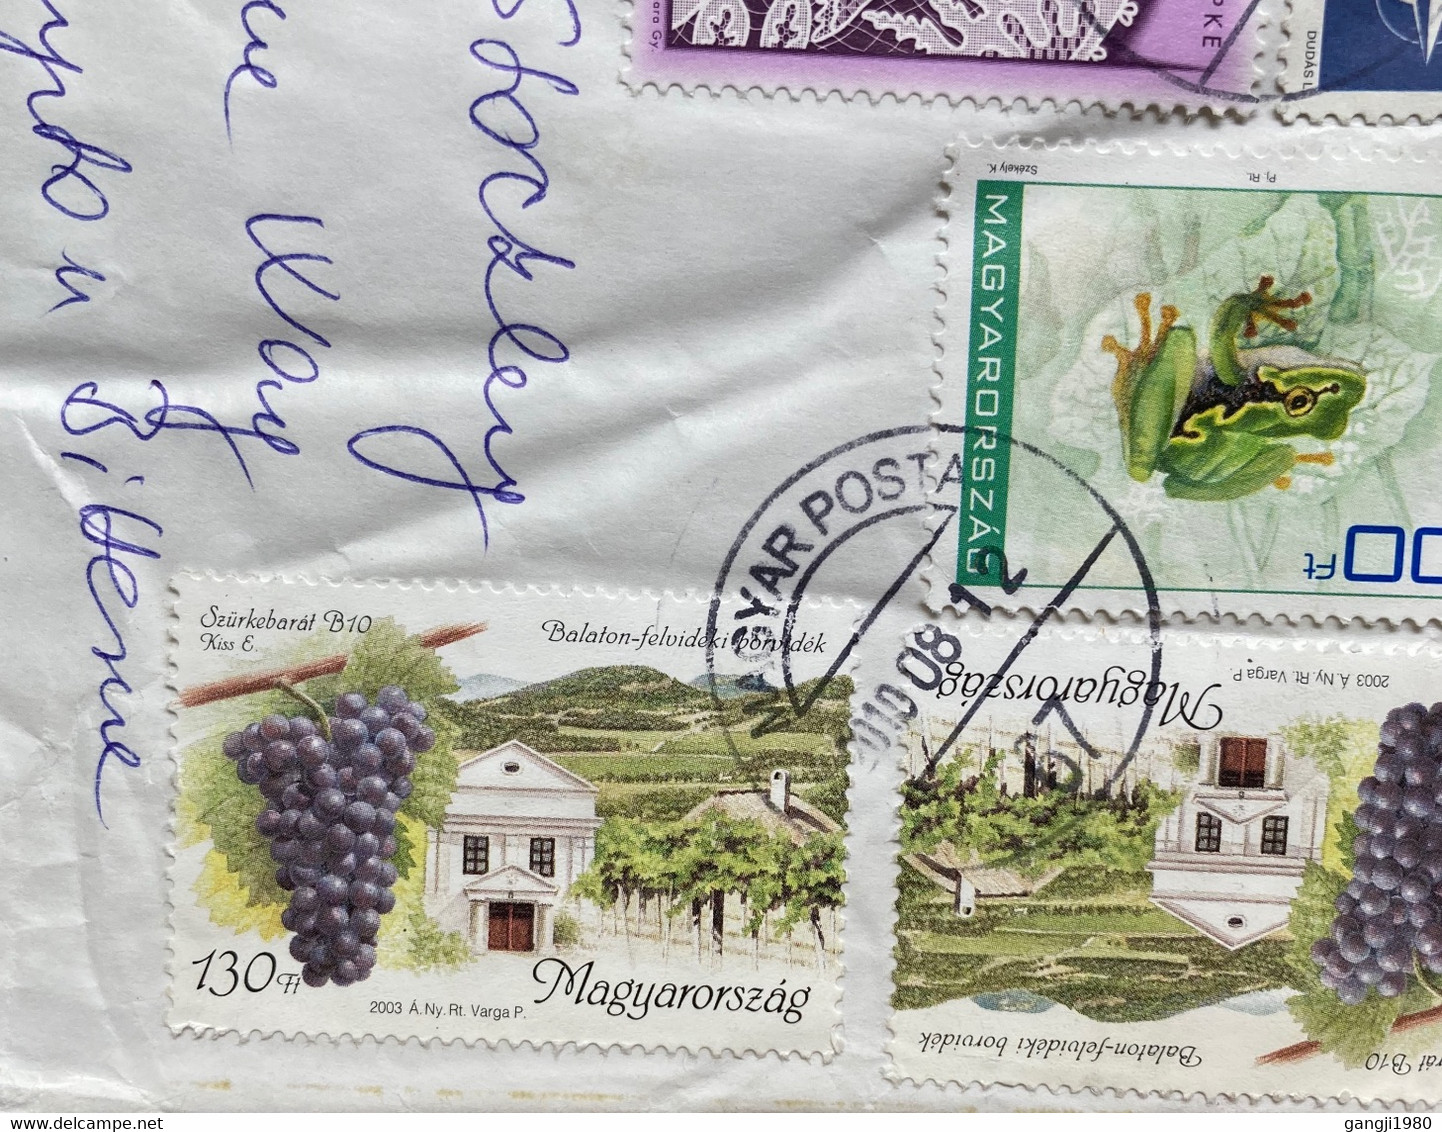 HUNGARY 2001-2002, COUPLE DANCE,FROG ,FISH ,RAILWAY,GRAPE ,EUROPA, MAP, NATURE,BUILDING,11 REGISTERED STAMPS USED !!! CO - Lettres & Documents